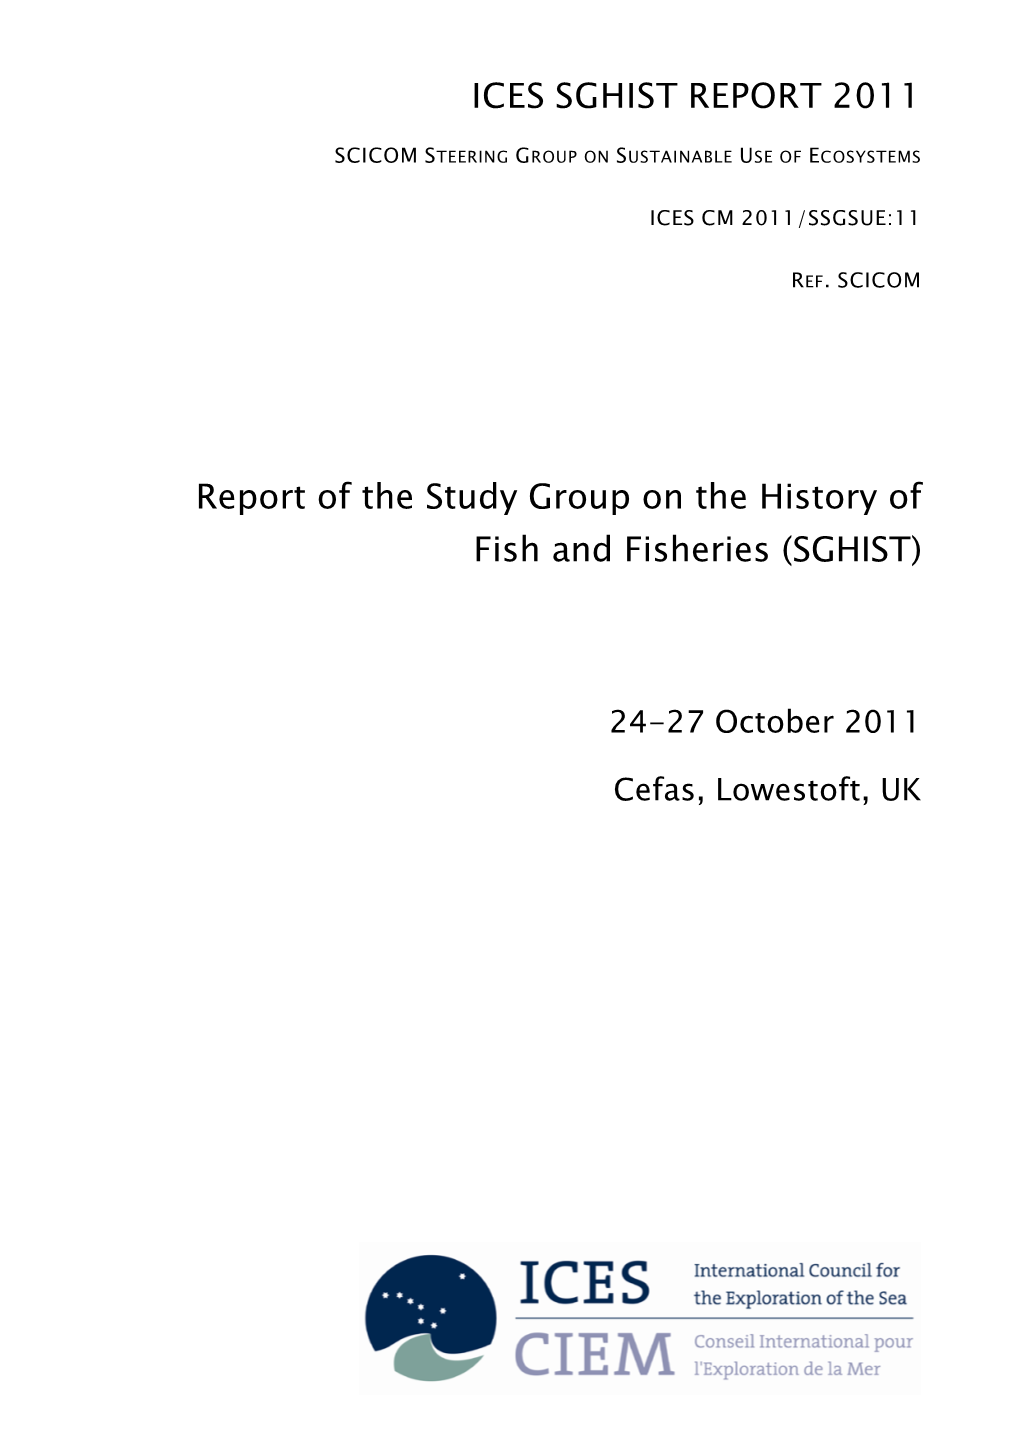 Report of the Study Group on the History of Fish and Fisheries (SGHIST)